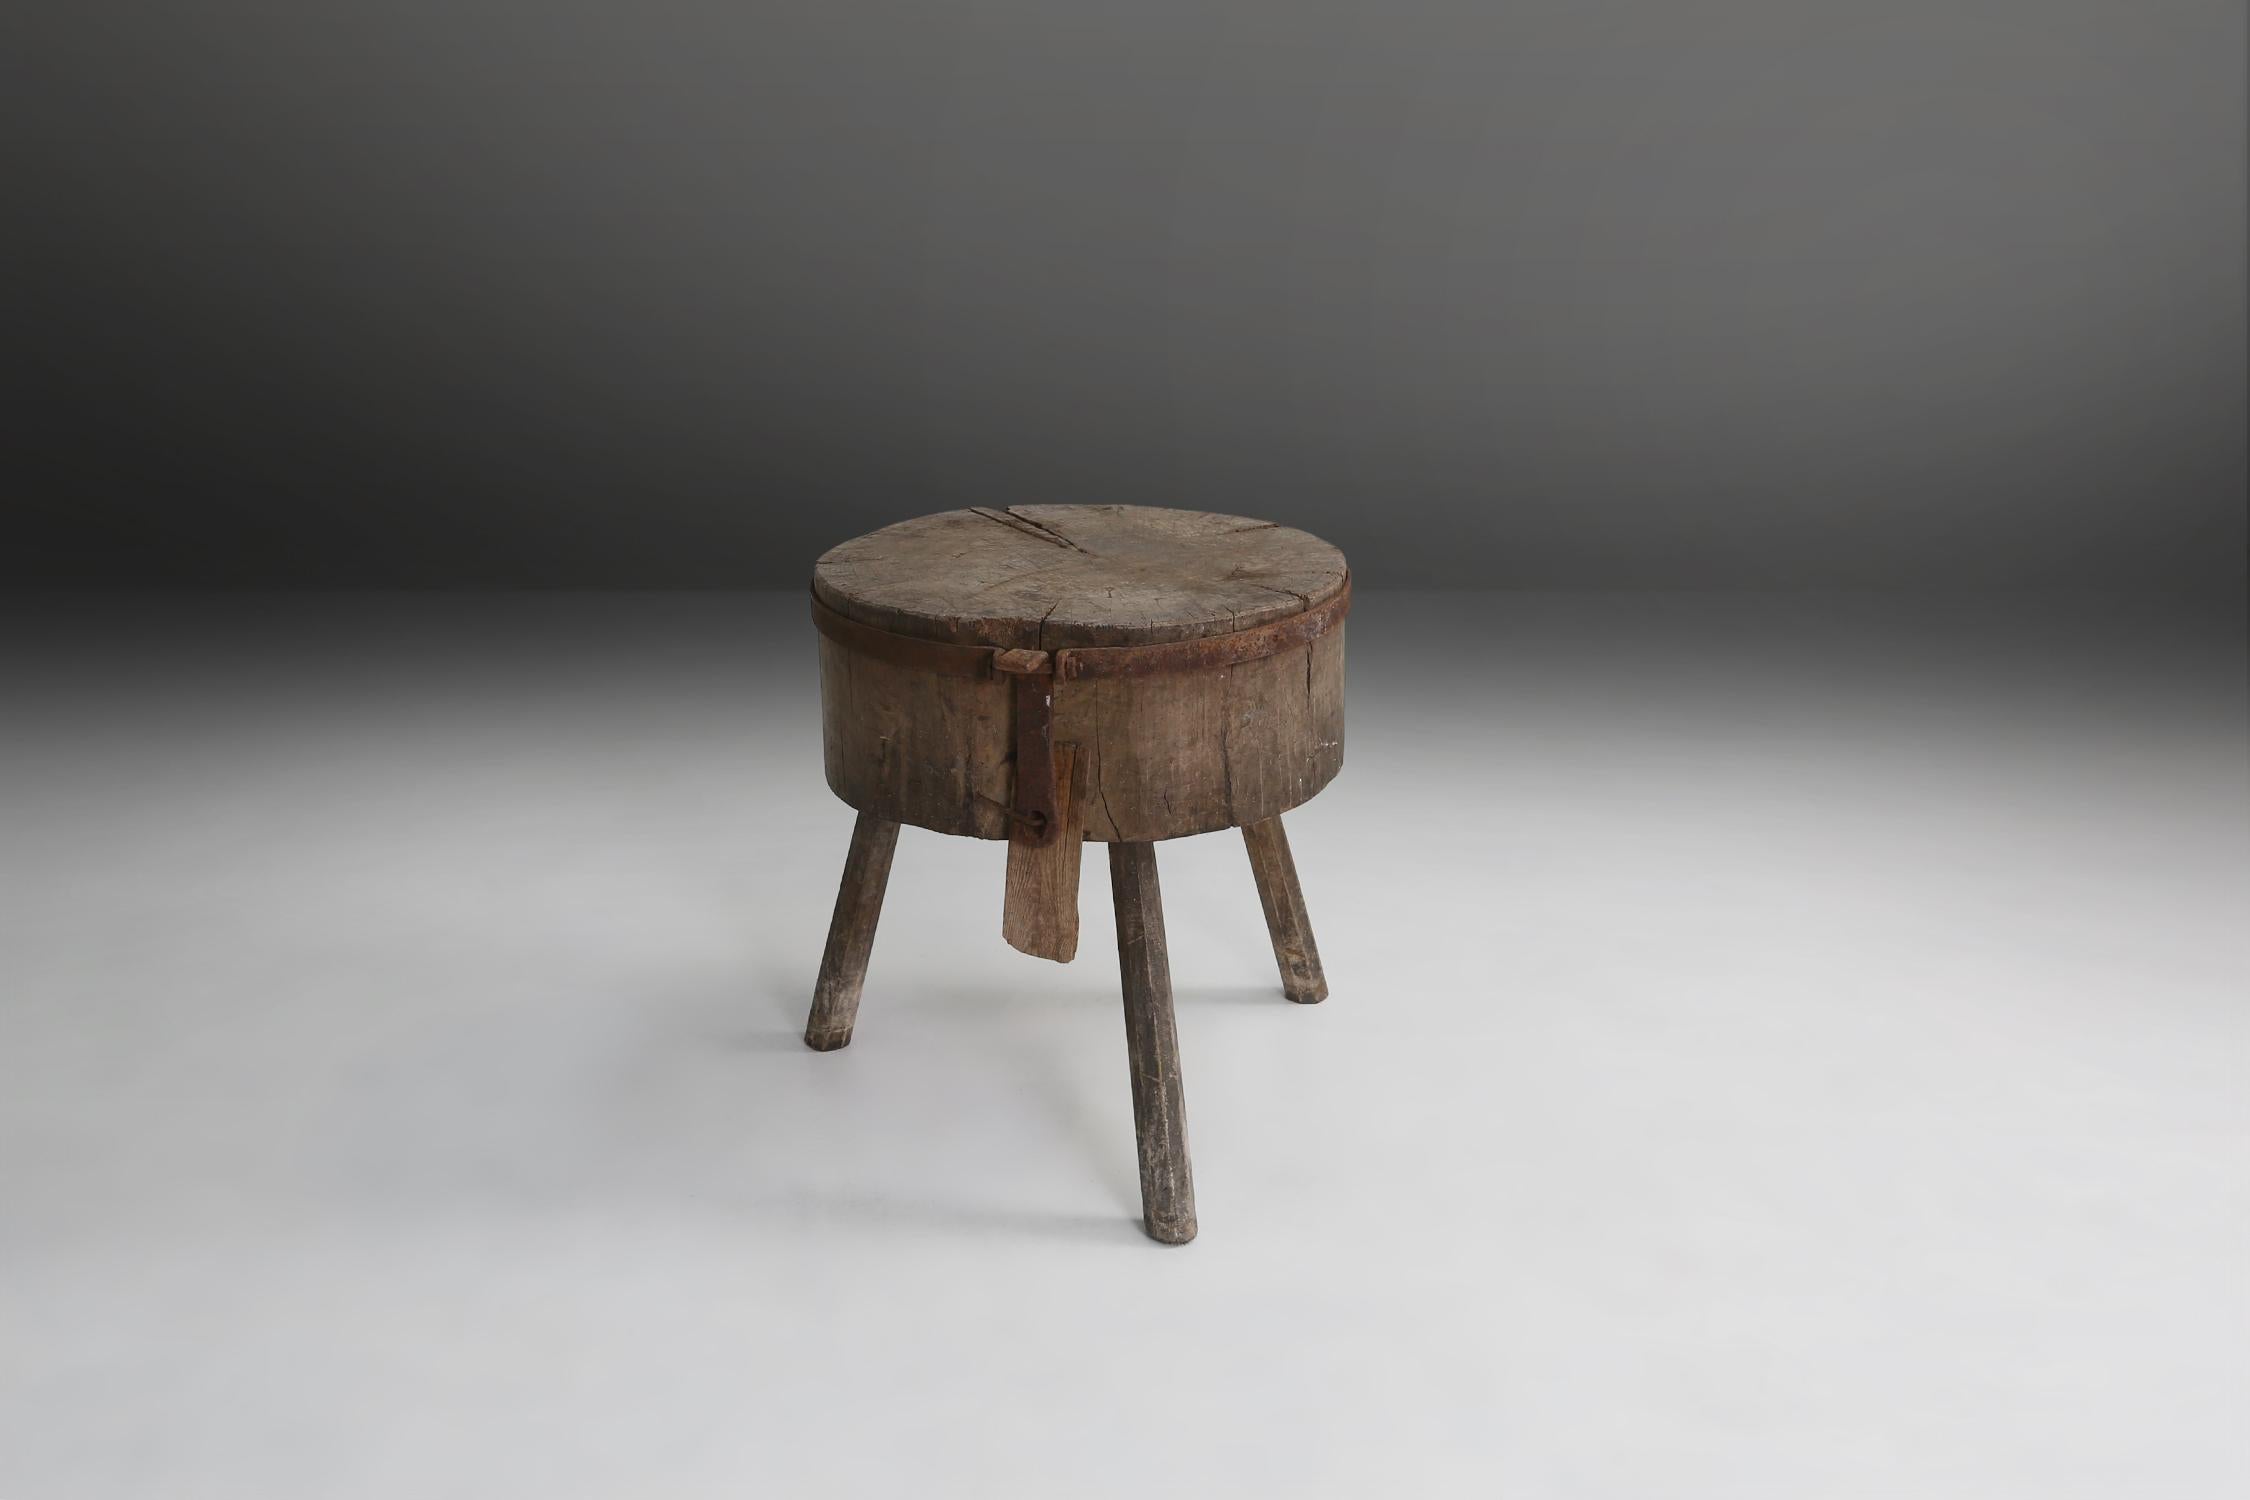 Unique antique chopping block that can serve as a side table having a fantastic rustic top.
An unsual but wonderfully decorative piece having a very desirable color and patina.

(This item has been treated against woodworm).